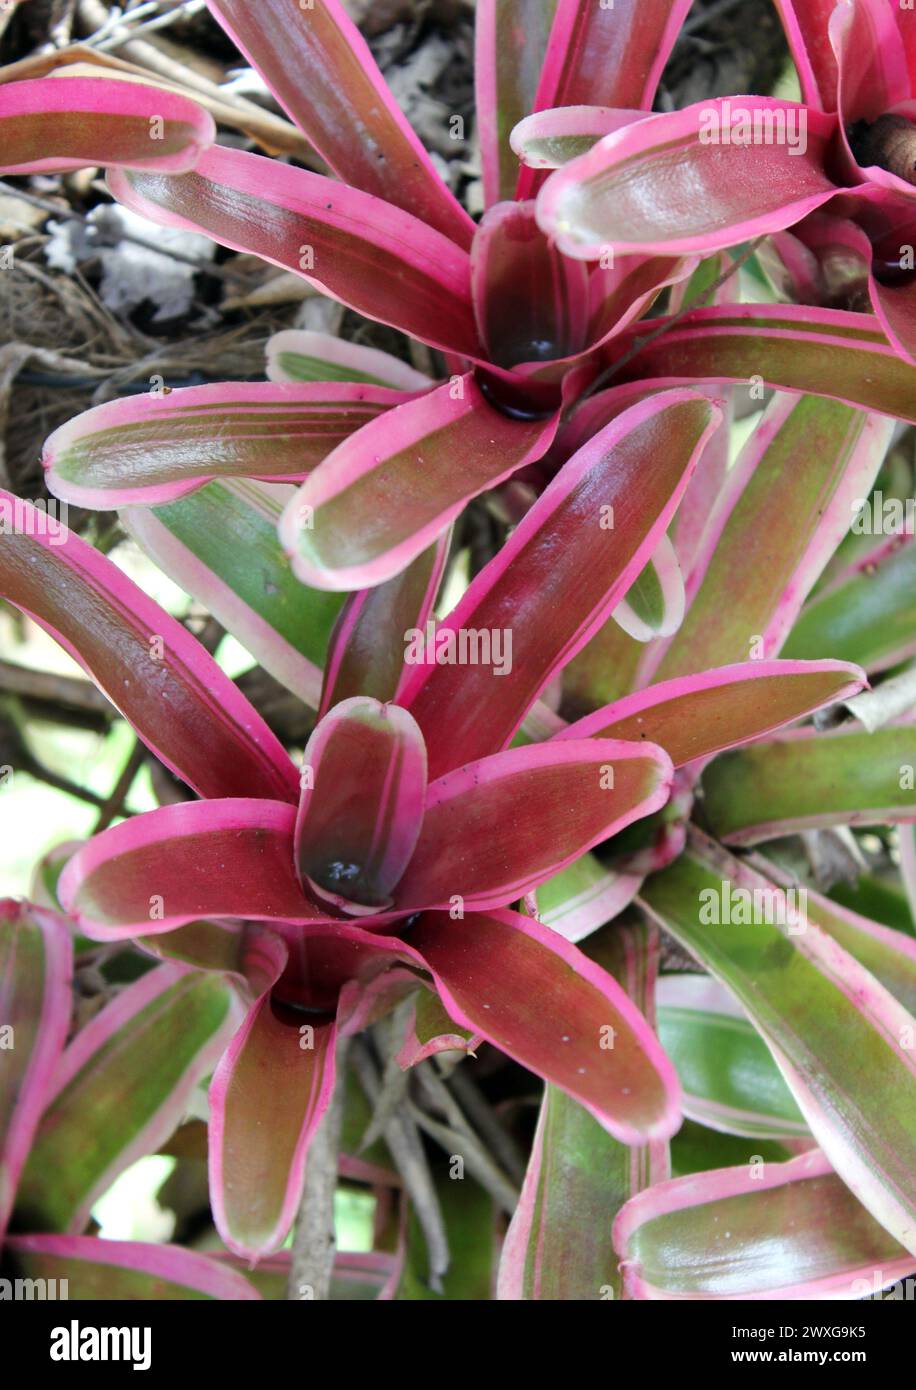 Group of pink and green bromeliad plants in a tropical garden Stock Photo